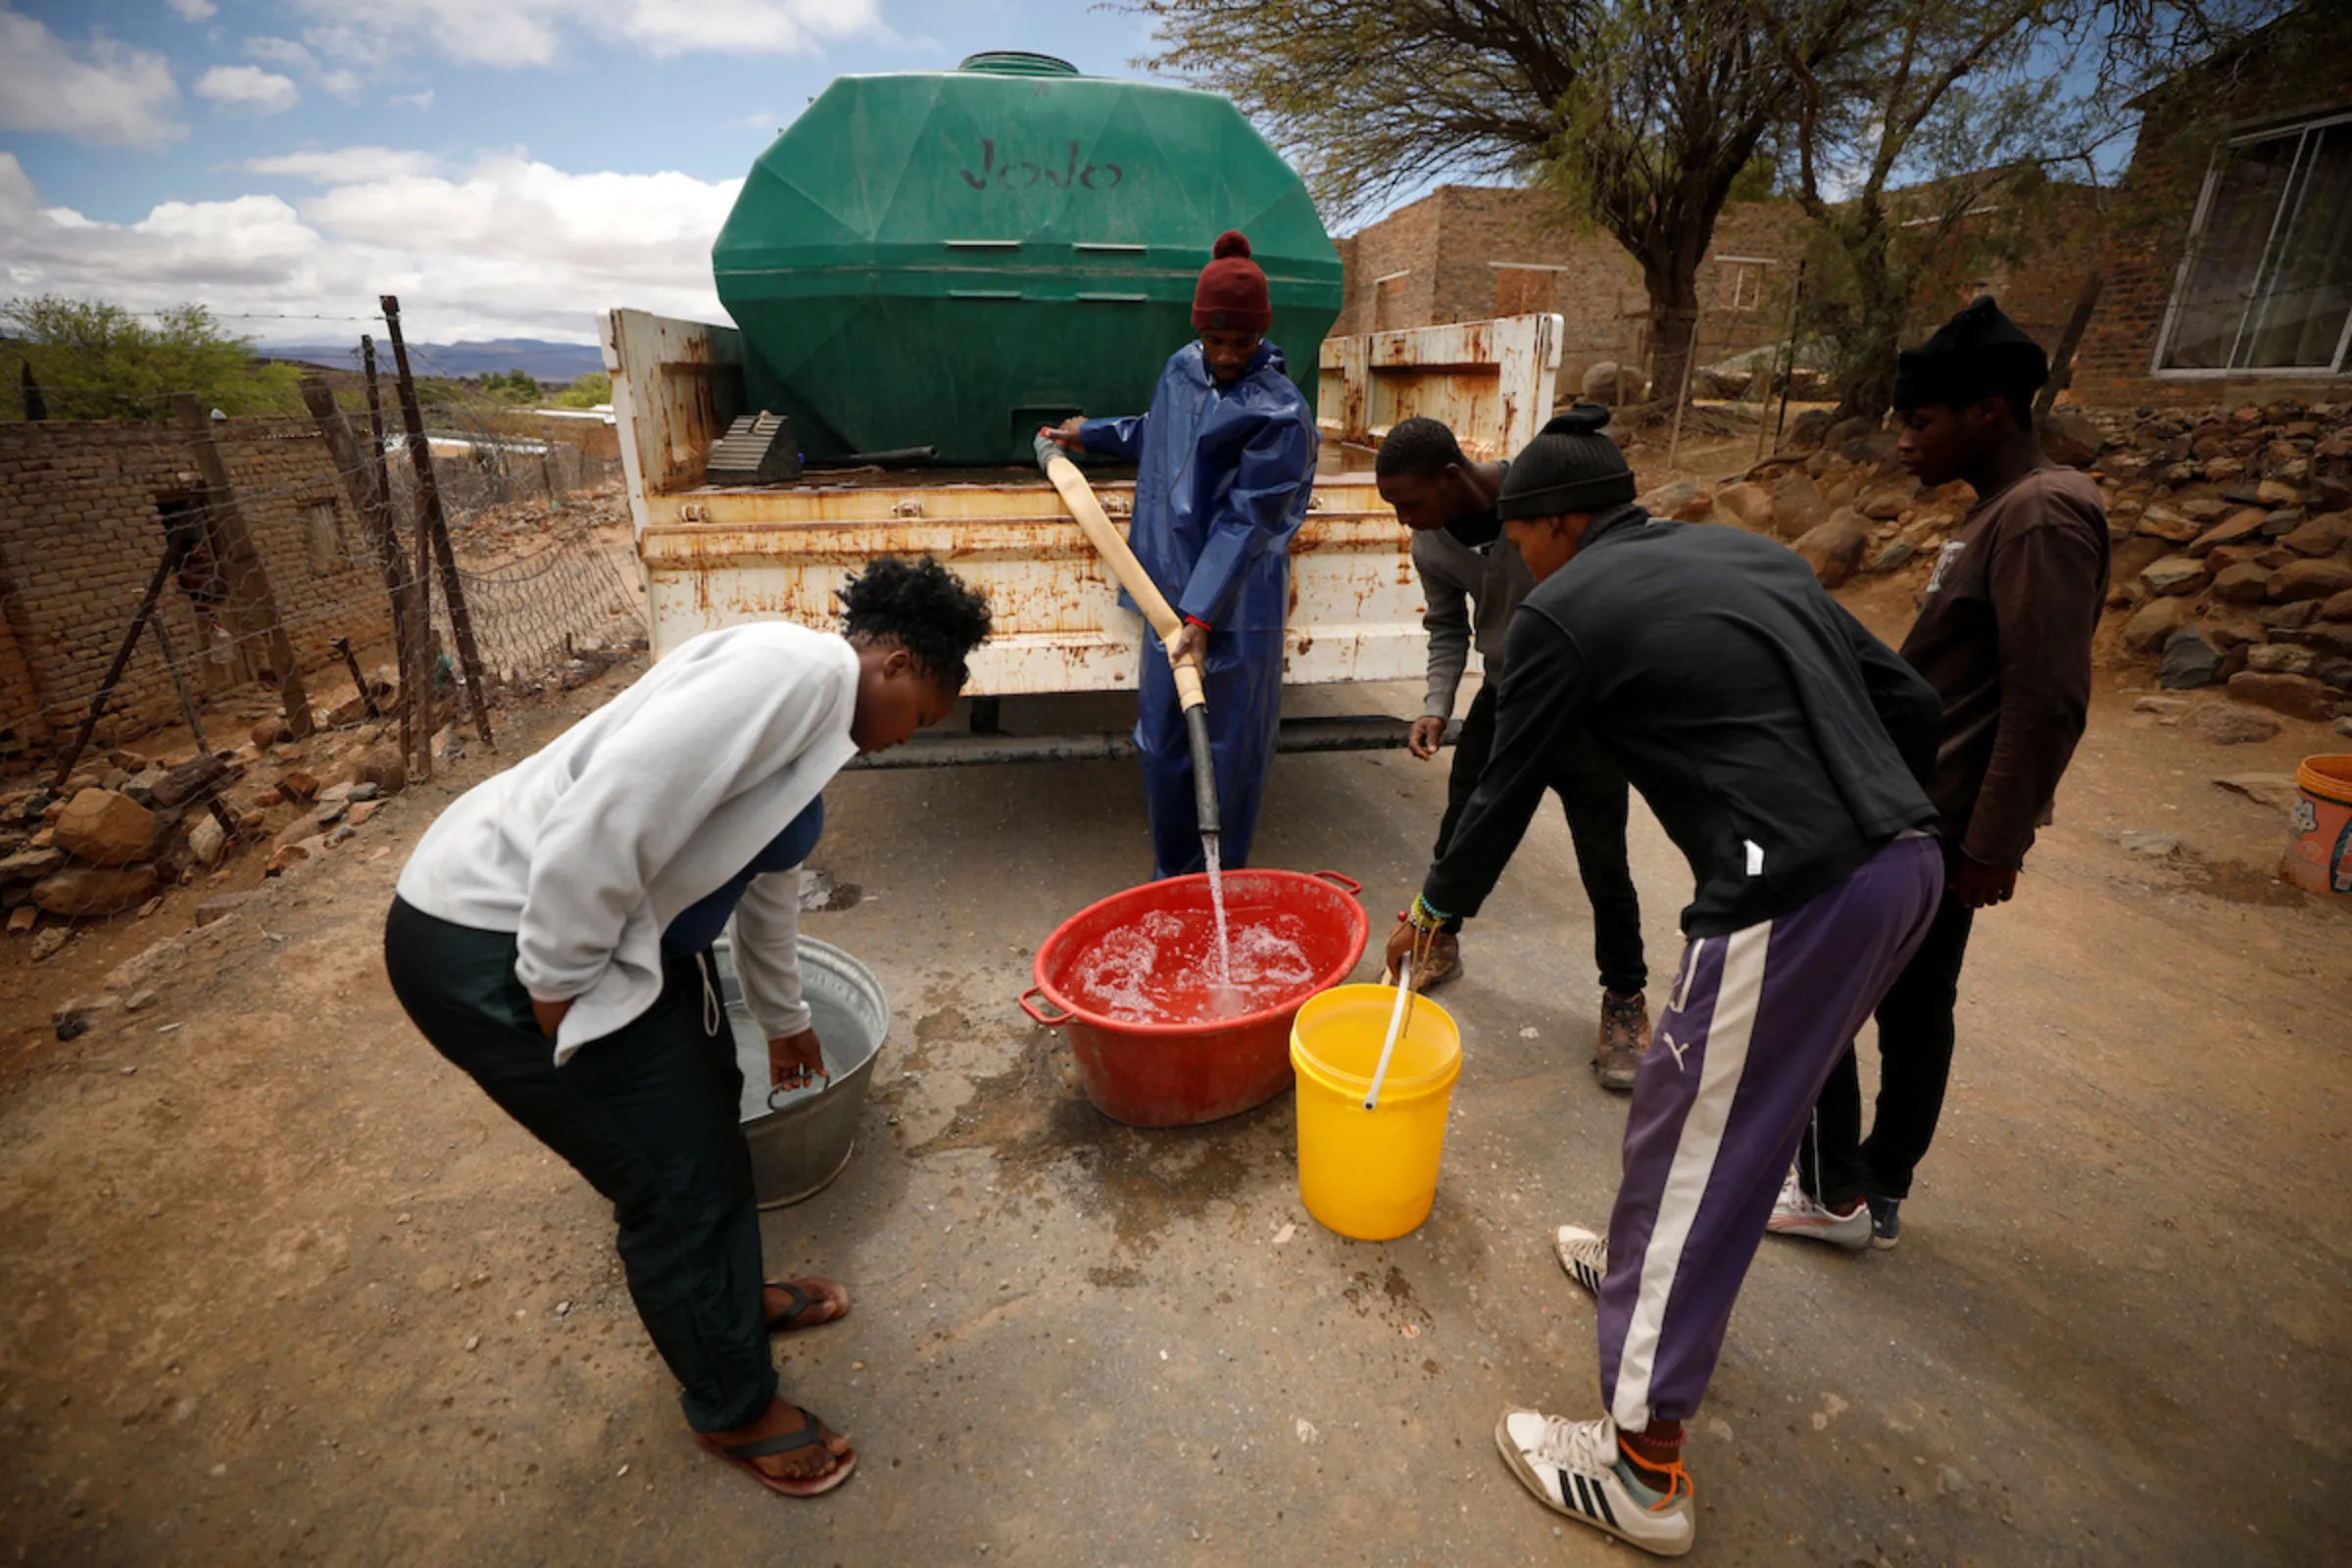 Township residents collect water from a municipal water tanker in drought-stricken Graaff-Reinet, South Africa, November 17, 2019. REUTERS/Mike Hutchings